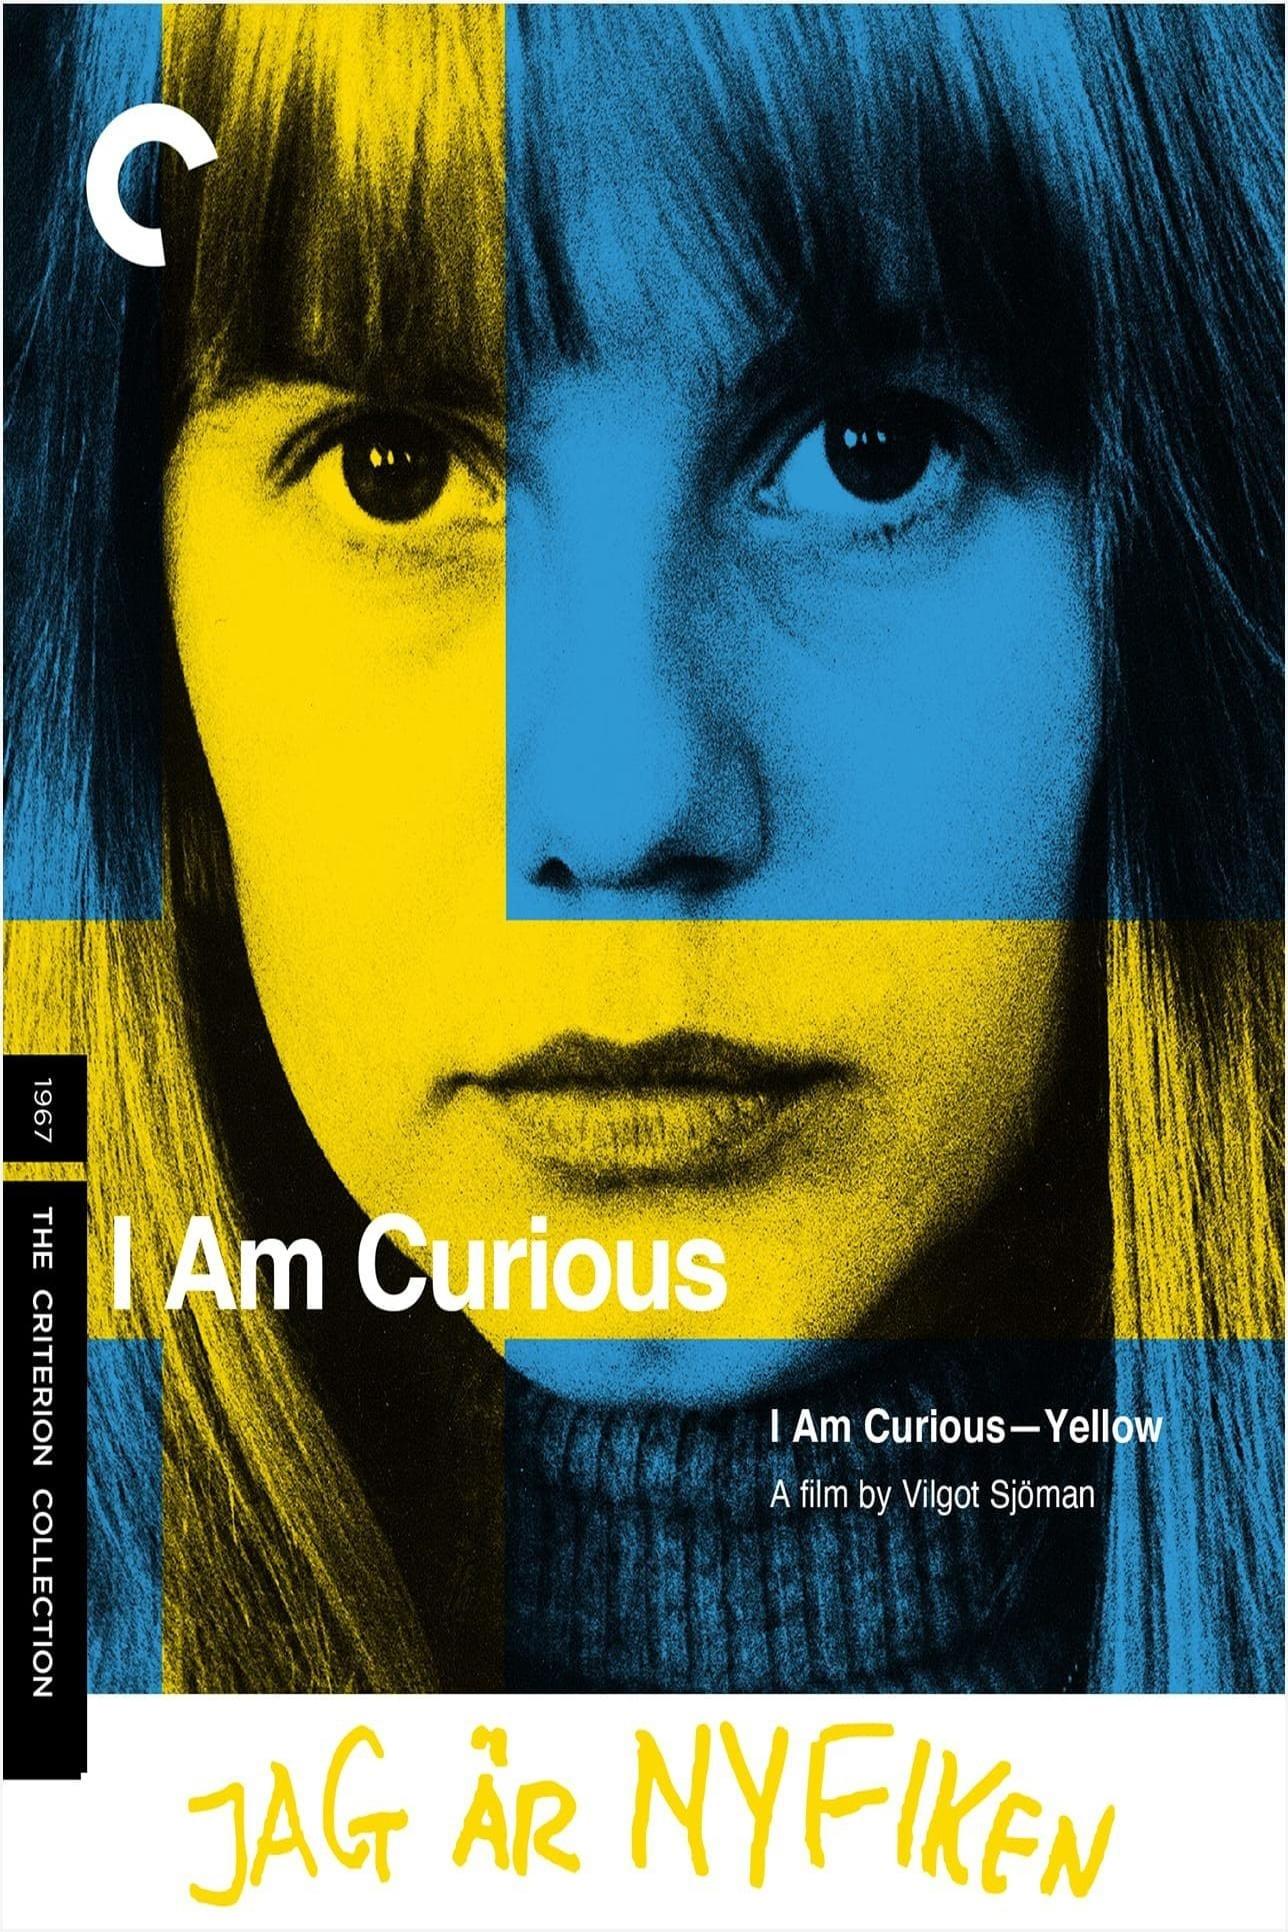 I Am Curious (Yellow) poster